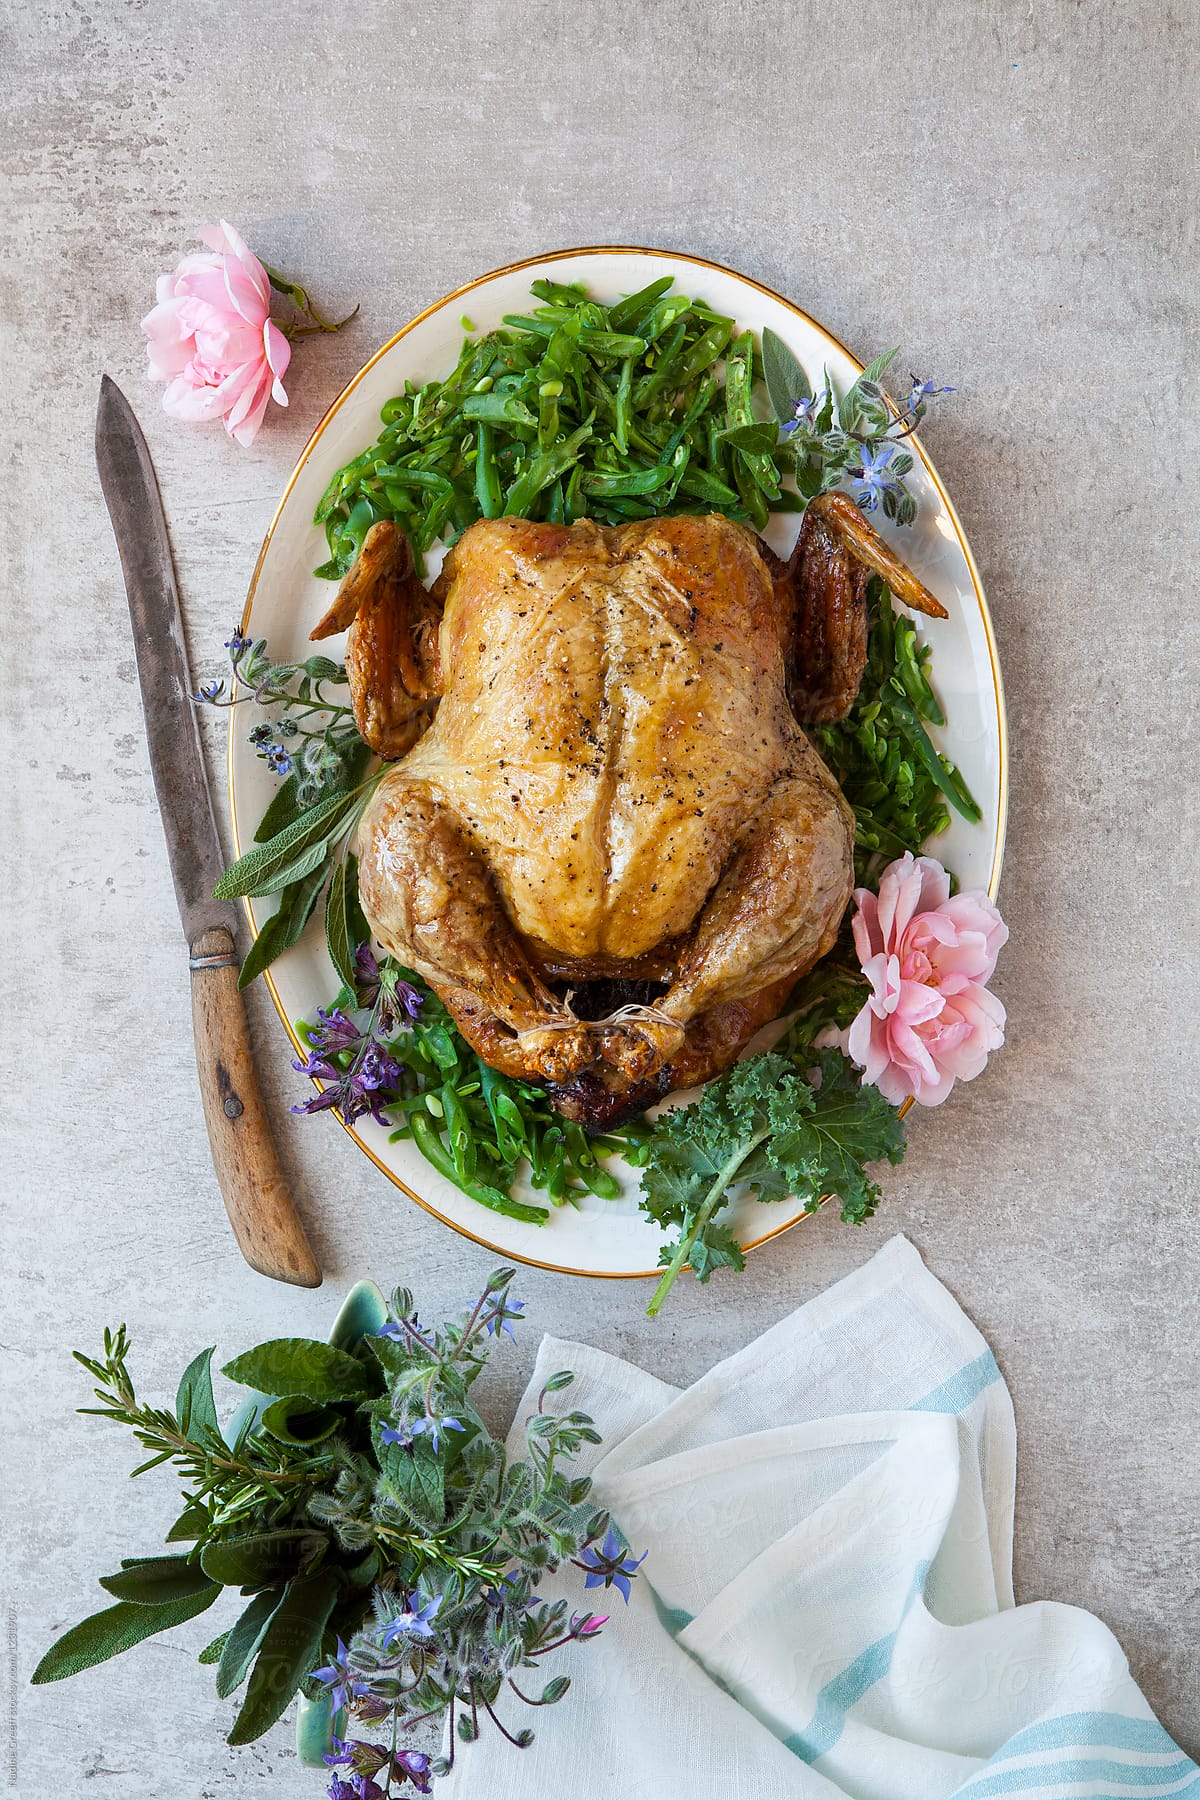 Roast chicken and green beans, decorated with flowers and herbs